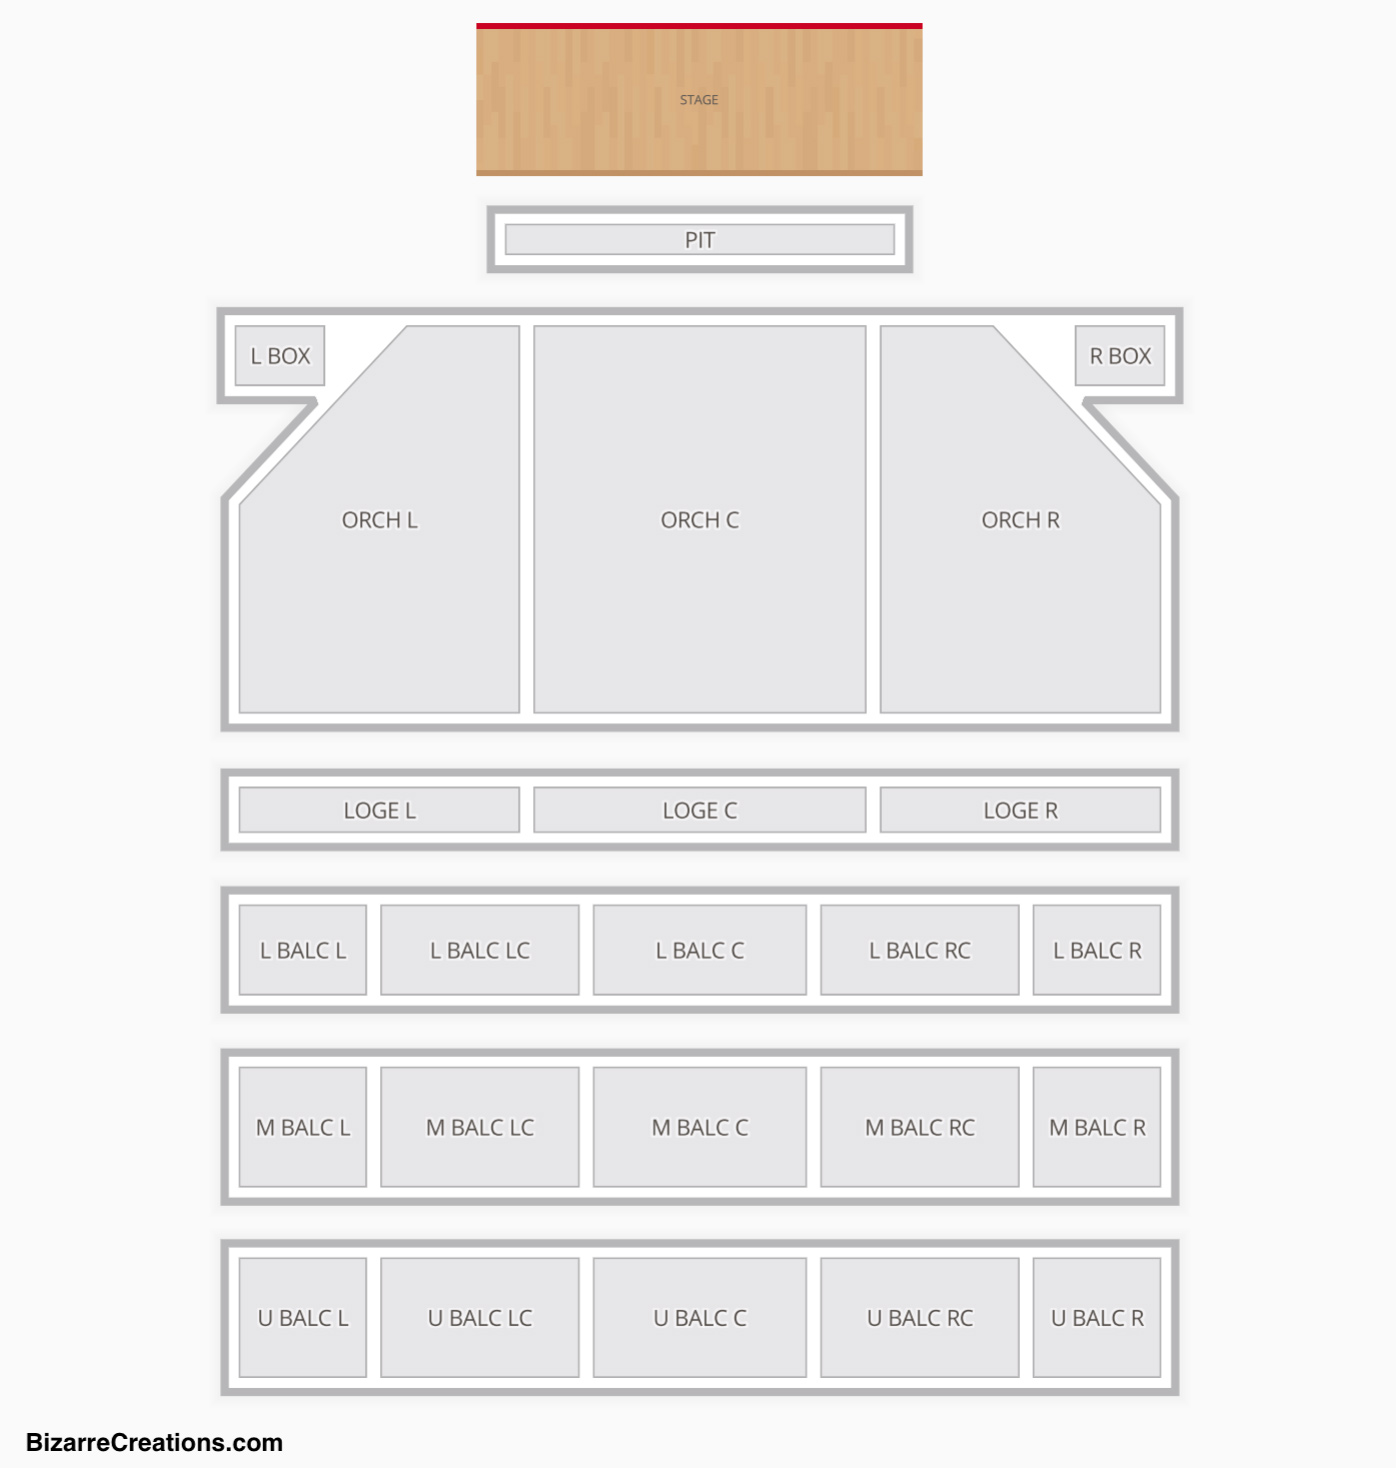 The Hanover Theatre Seating Chart Seating Charts & Tickets